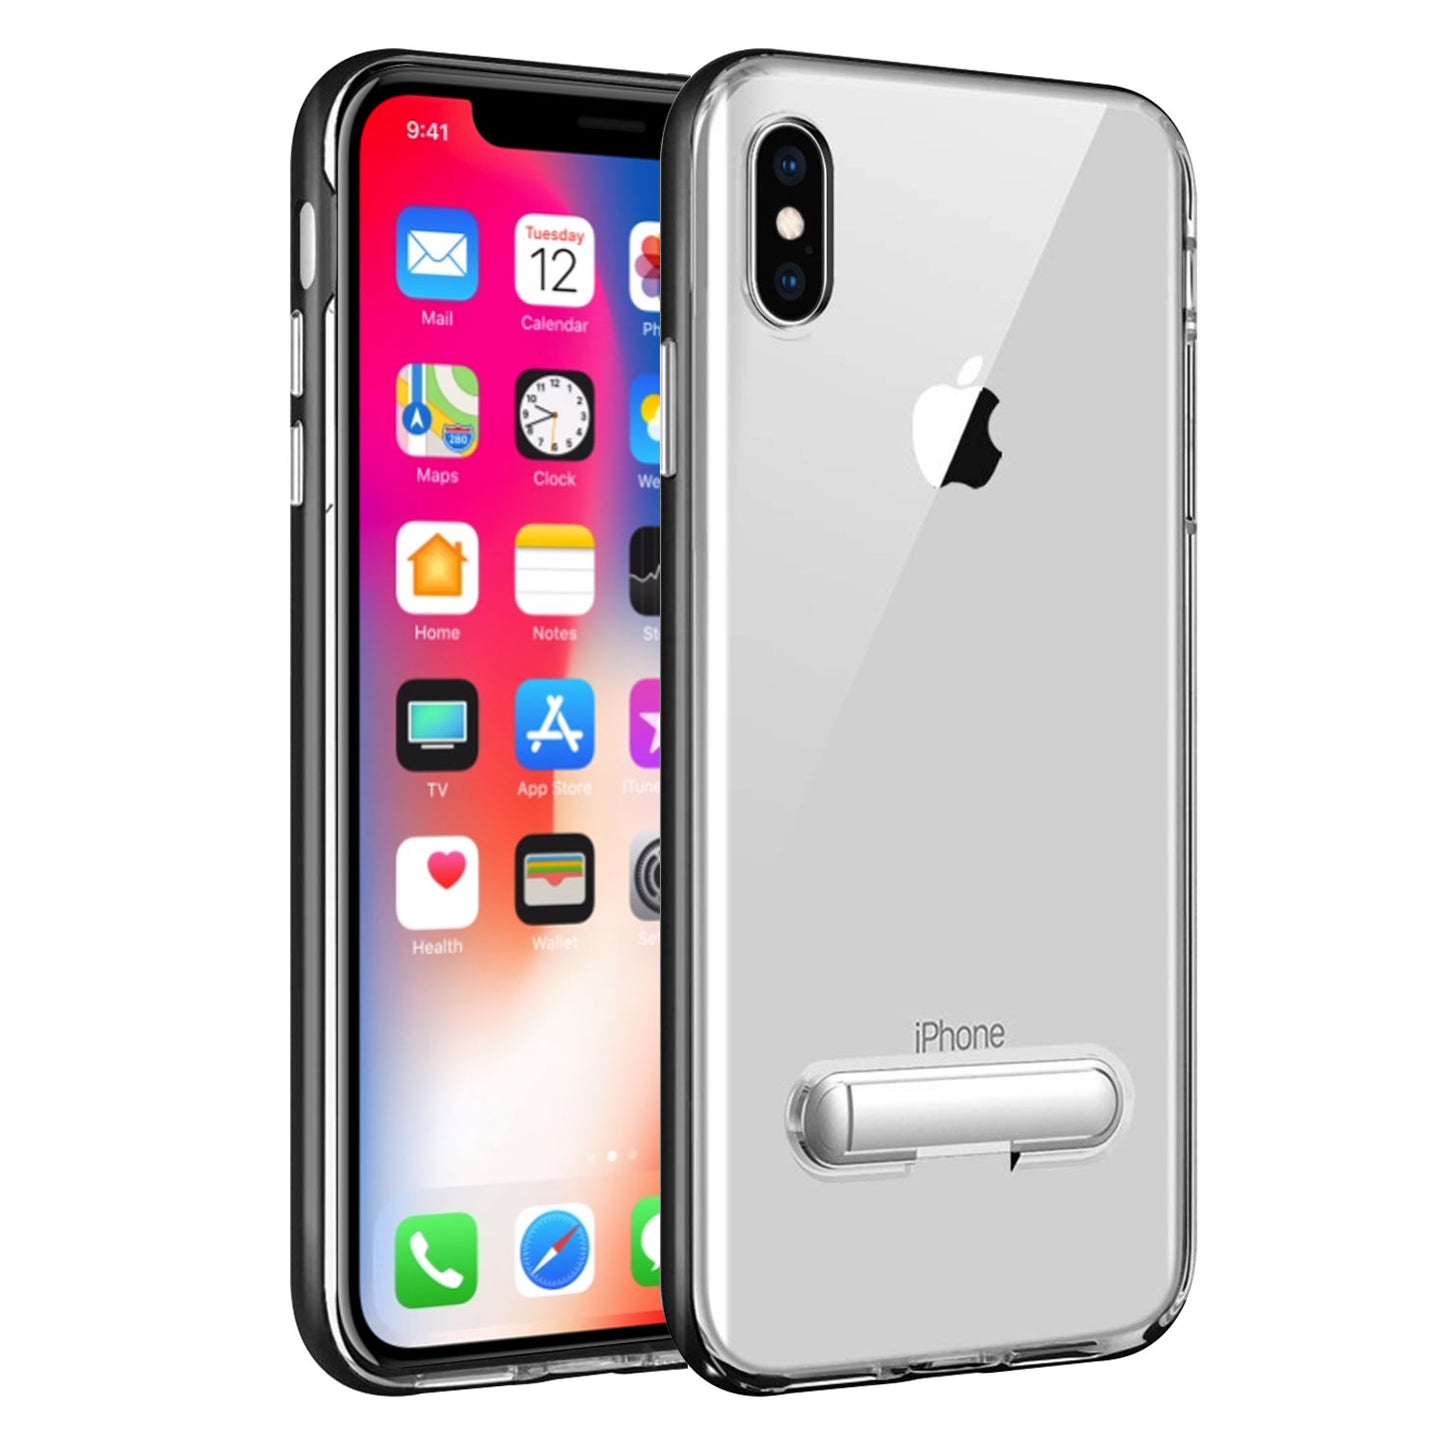 iPhone X, Slim Transparent Case with TPU Frame and Built-In Kickstand for Apple iPhone X by Cellet – Black/Clear